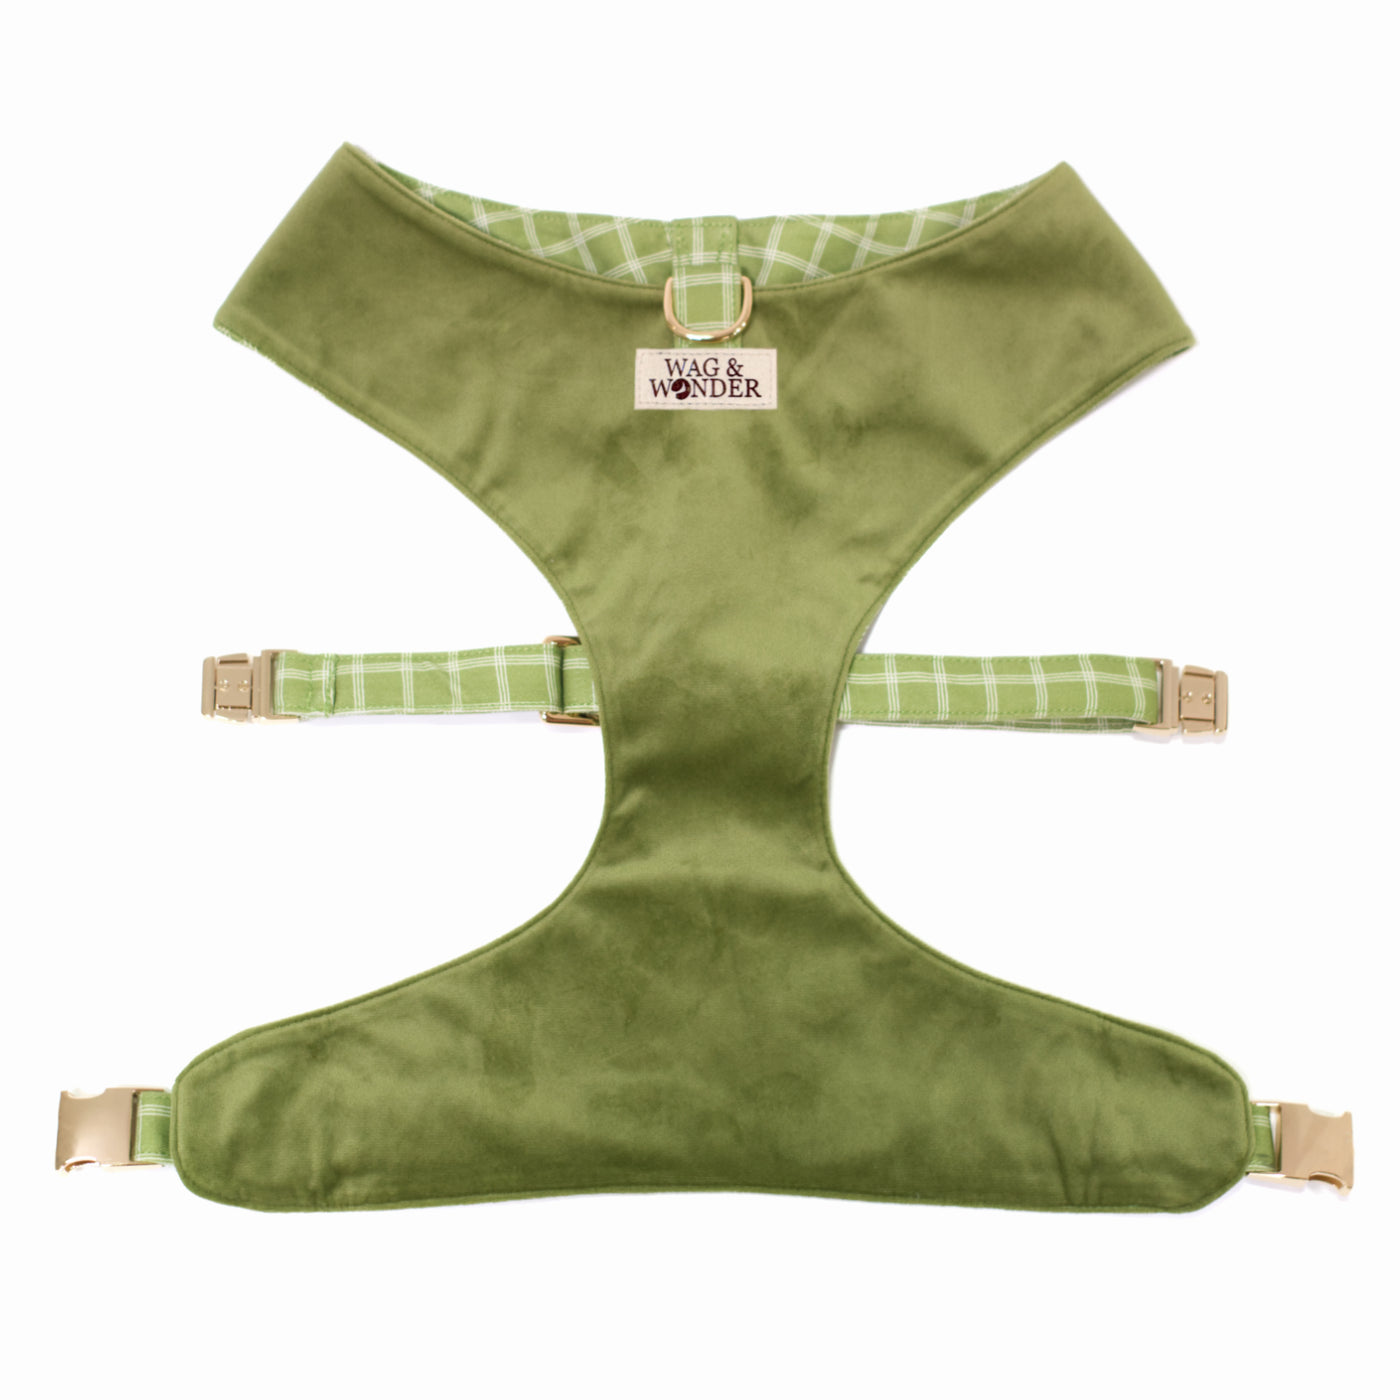 Moss green reversible dog harness with gold hardware